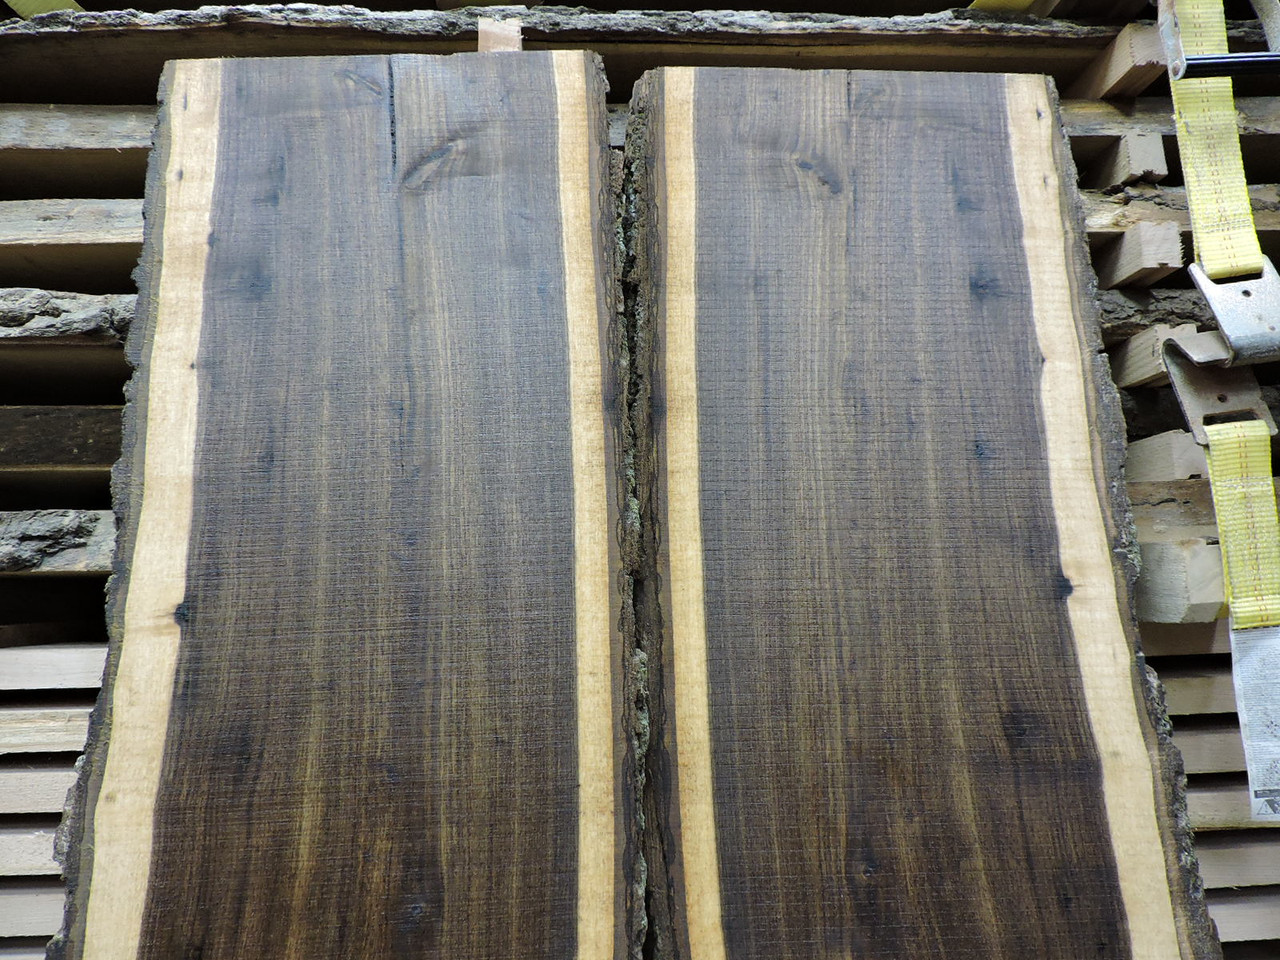 8/4 Bookmatched Curly Walnut Live Edge Slabs - 429 AB